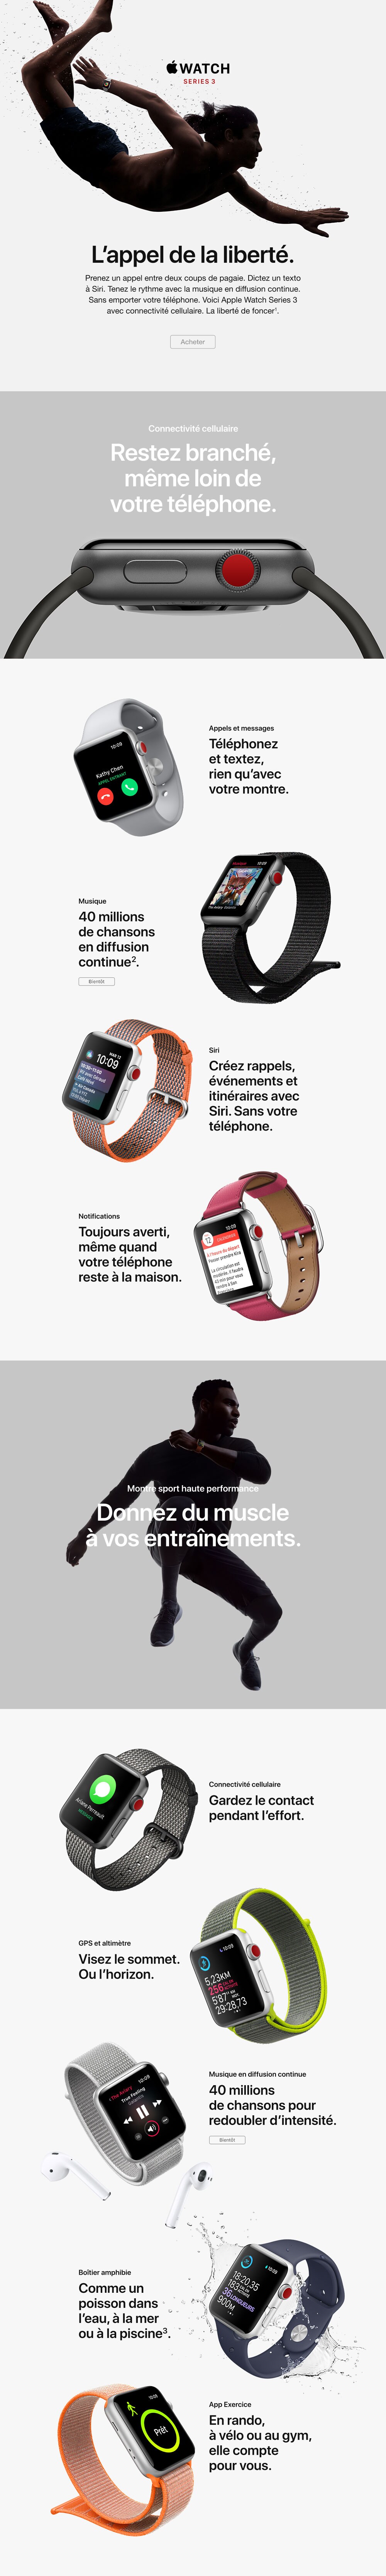 RiverPage_AppleWatch_Cellular_NowHere_BuyNow_Desktop_01_FR.jpg